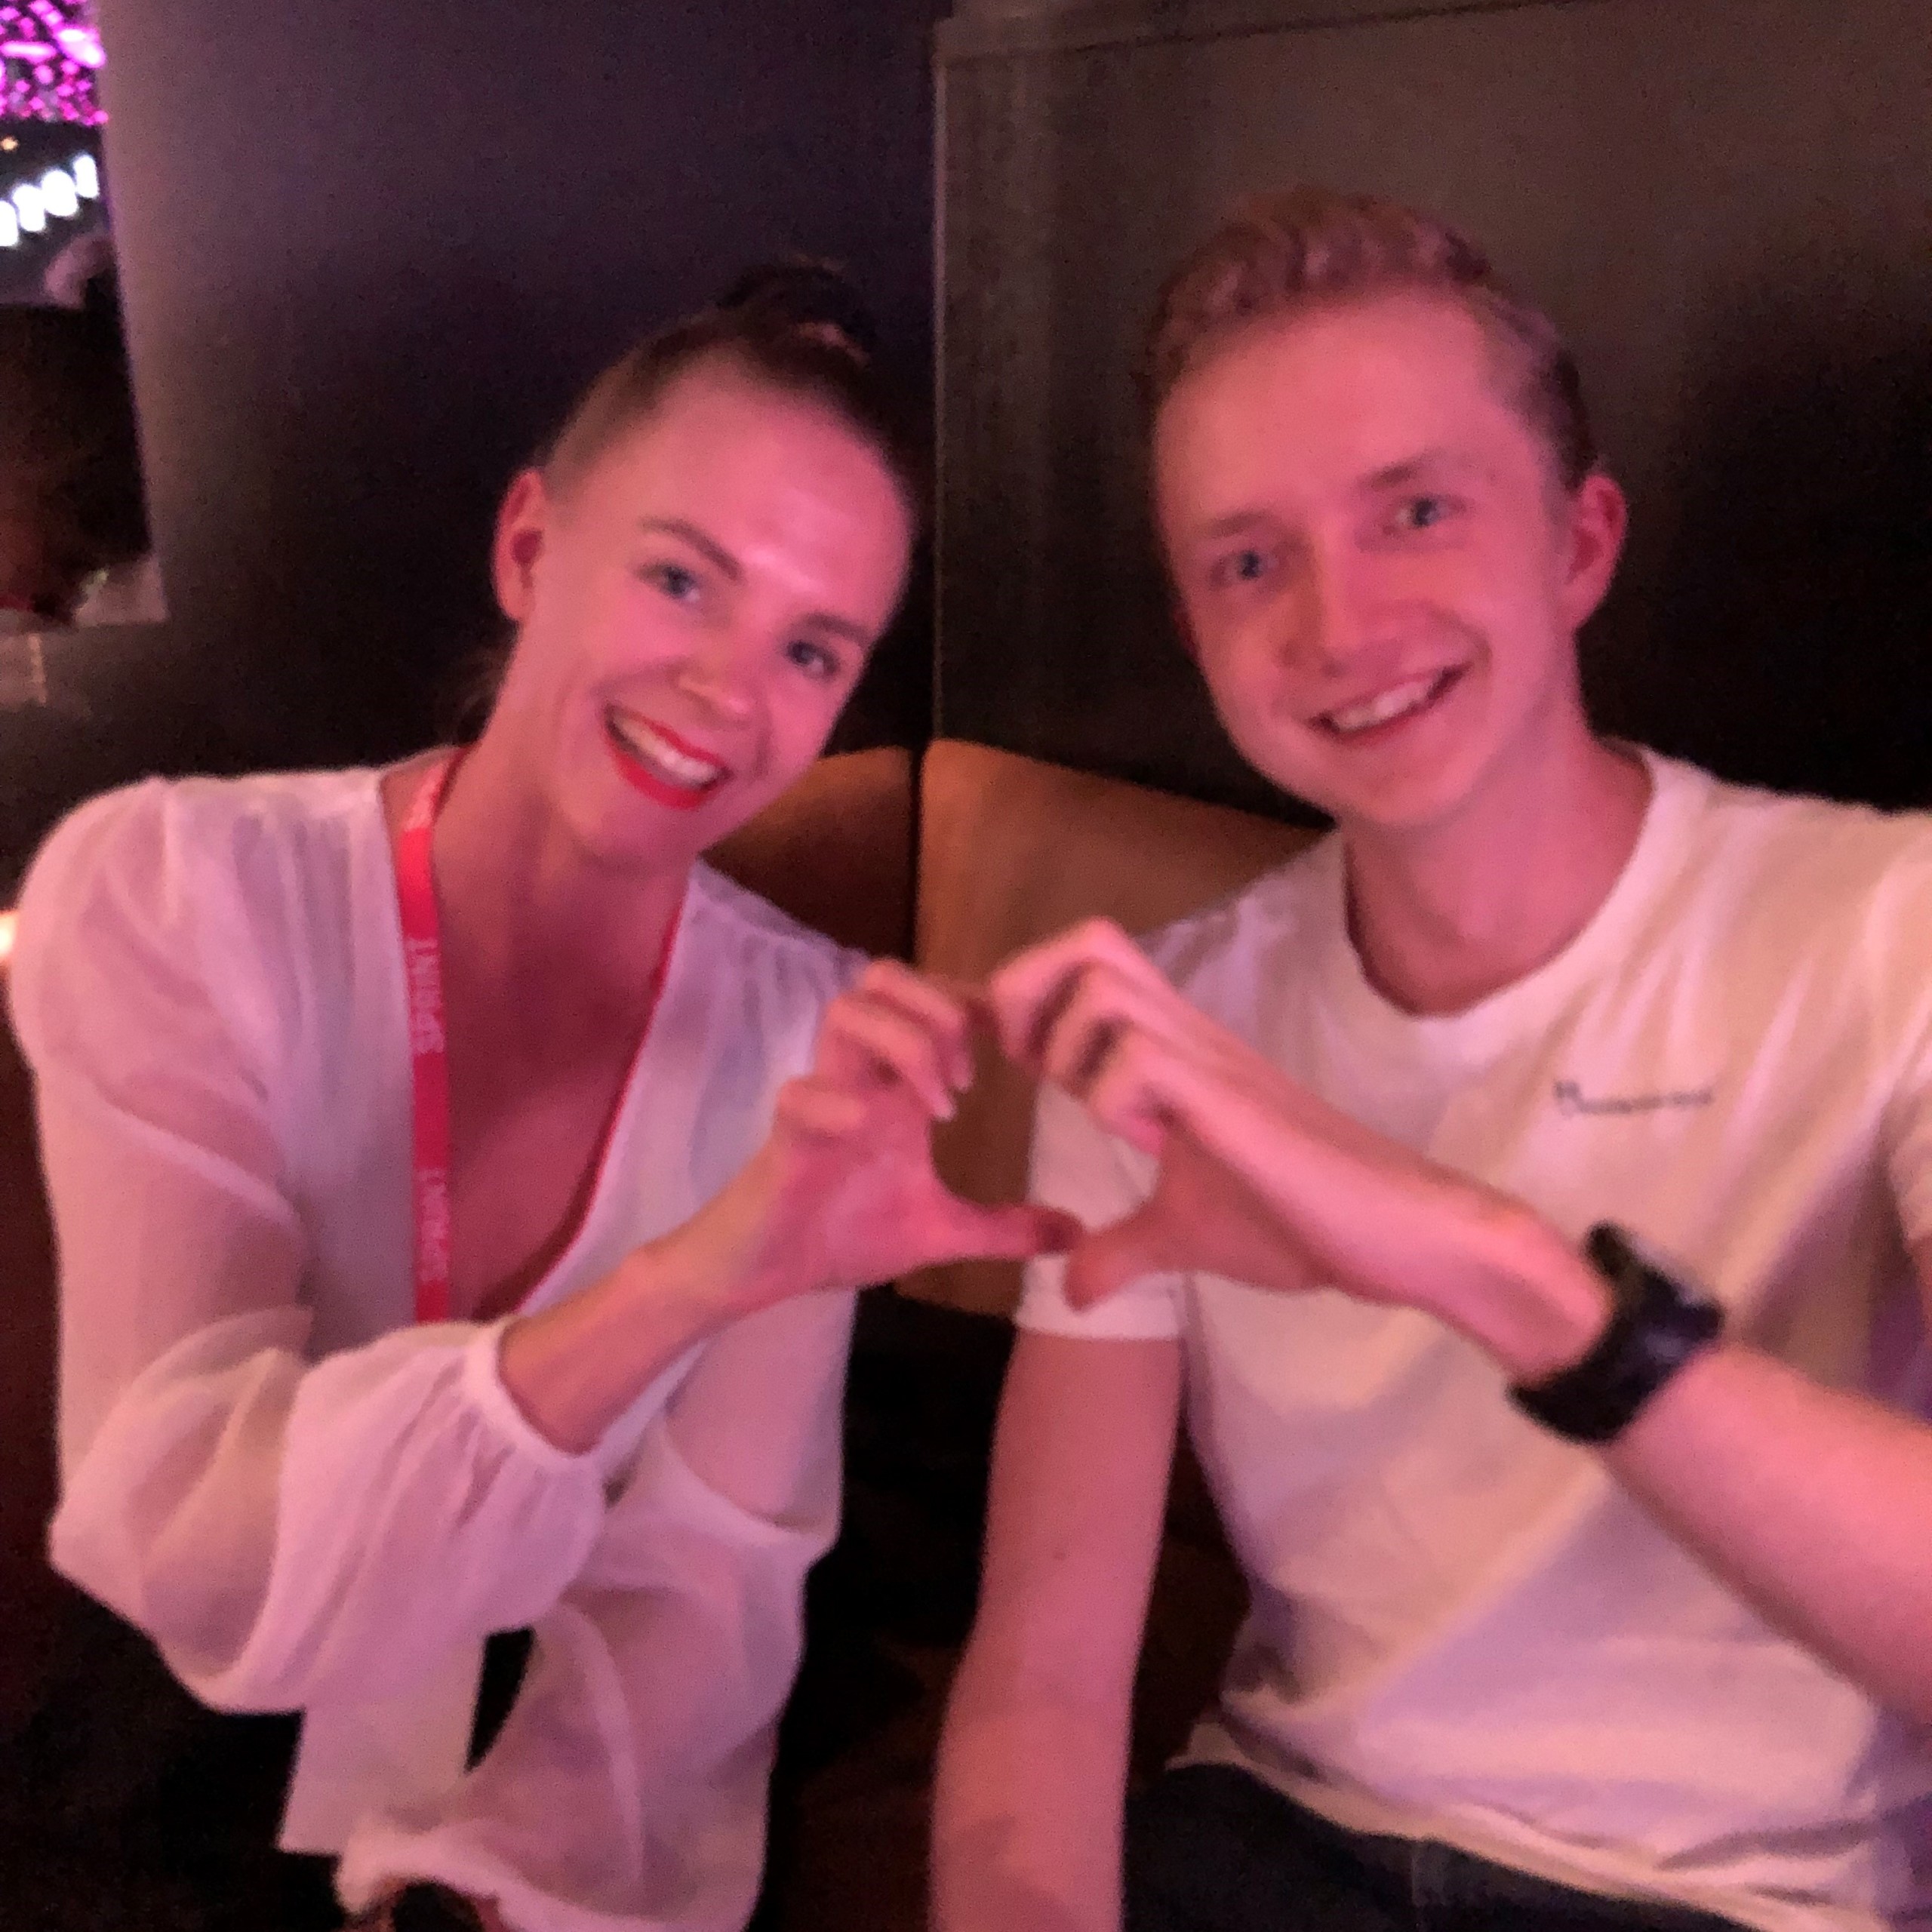 Two people sitting next to each other forming a heart with their fingers.